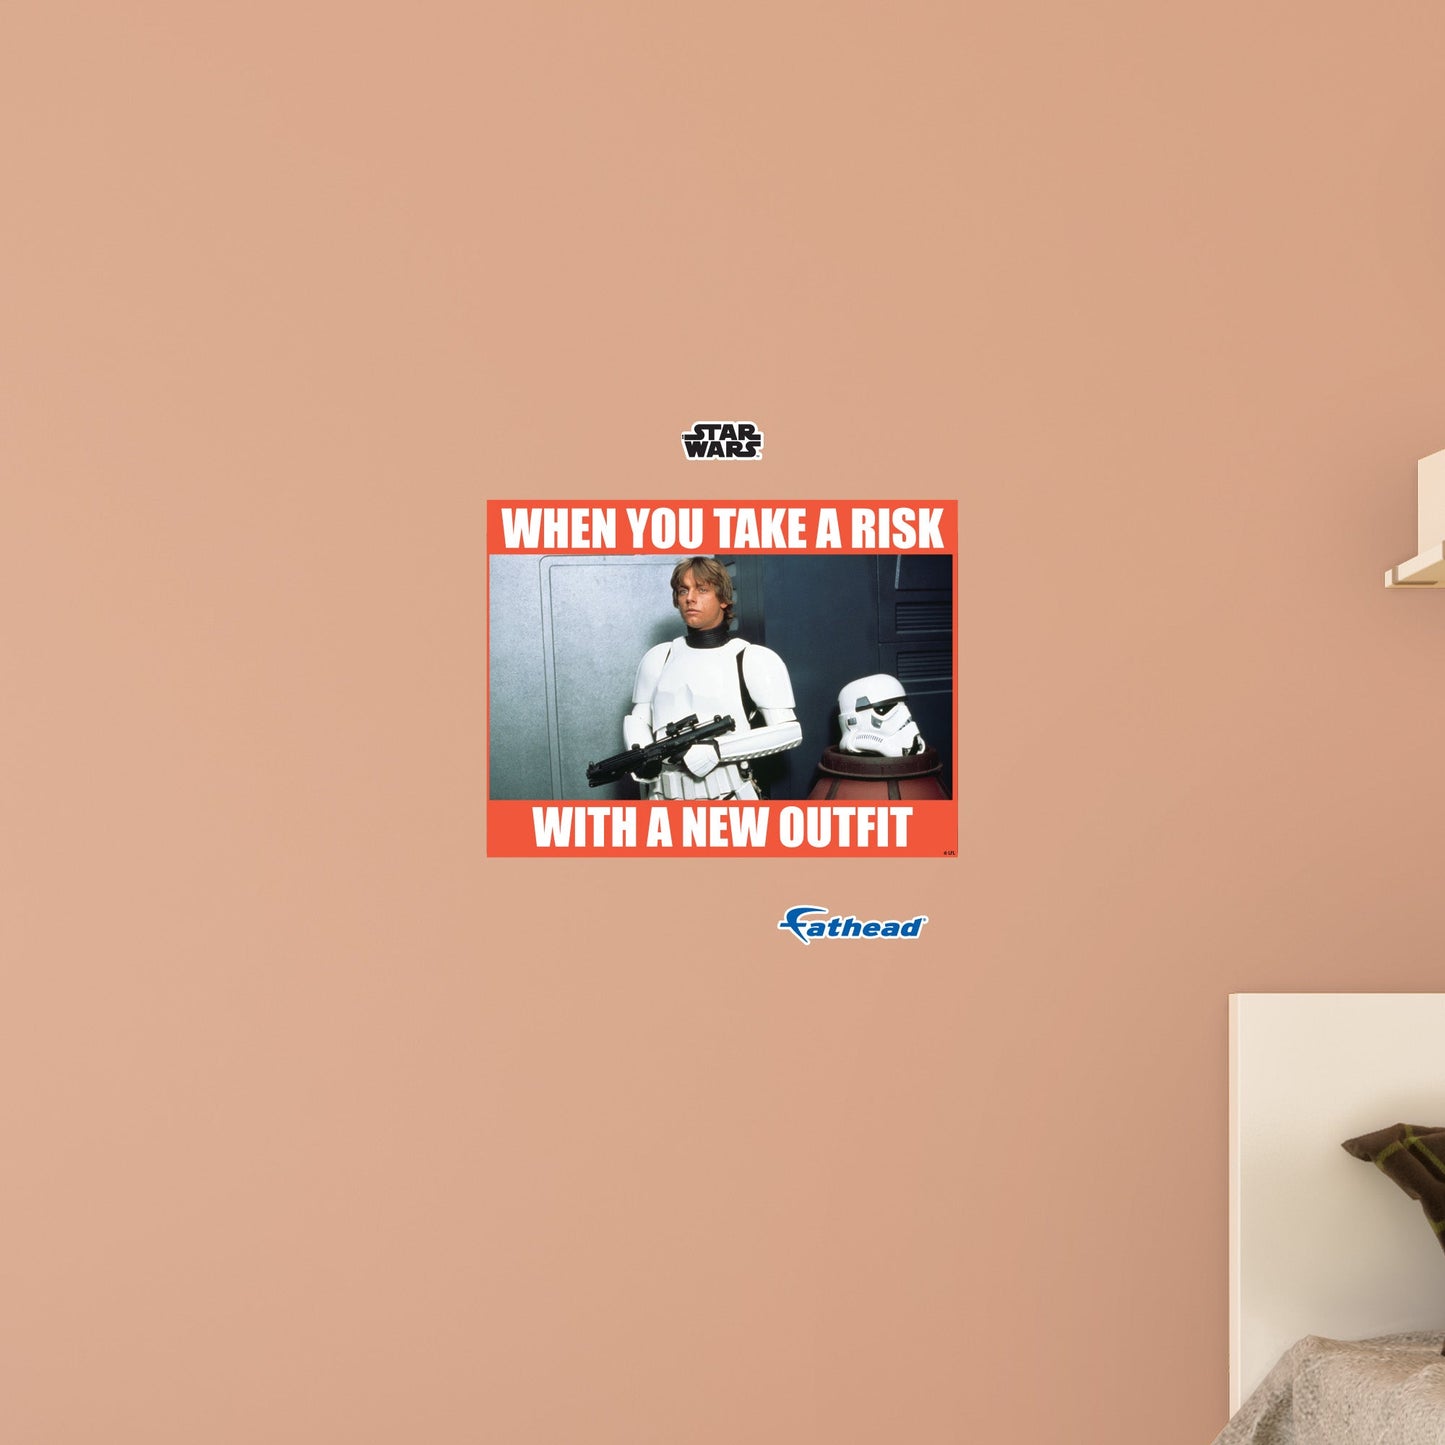 New Outfit meme Poster        - Officially Licensed Star Wars Removable     Adhesive Decal